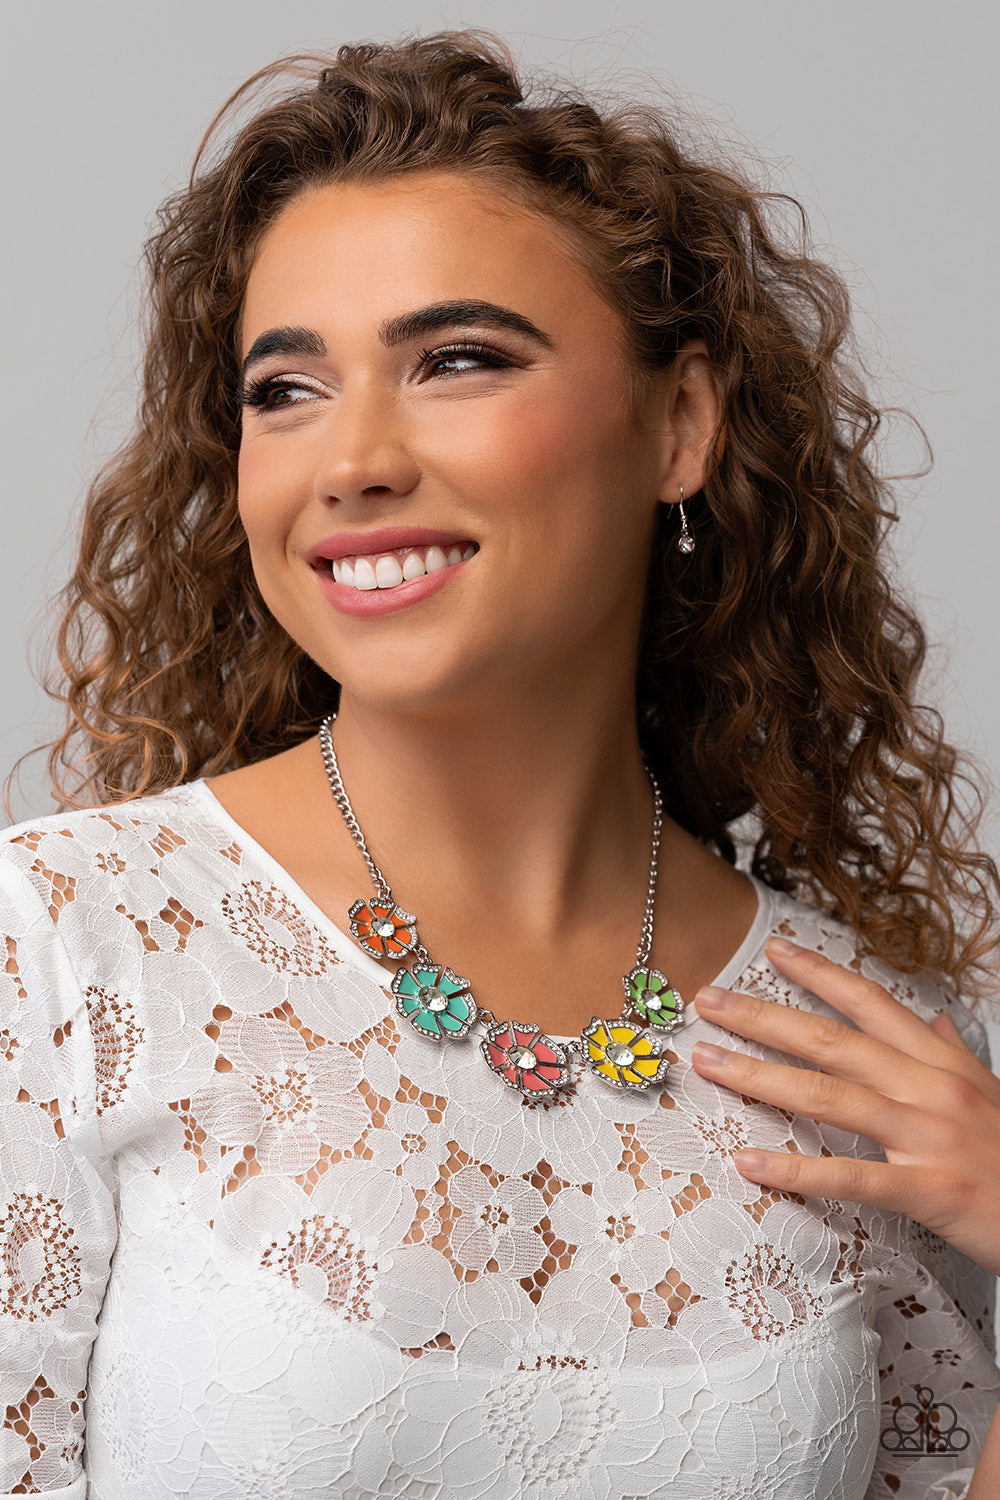 Playful Posies - Multi Necklace  - Paparazzi Accessories